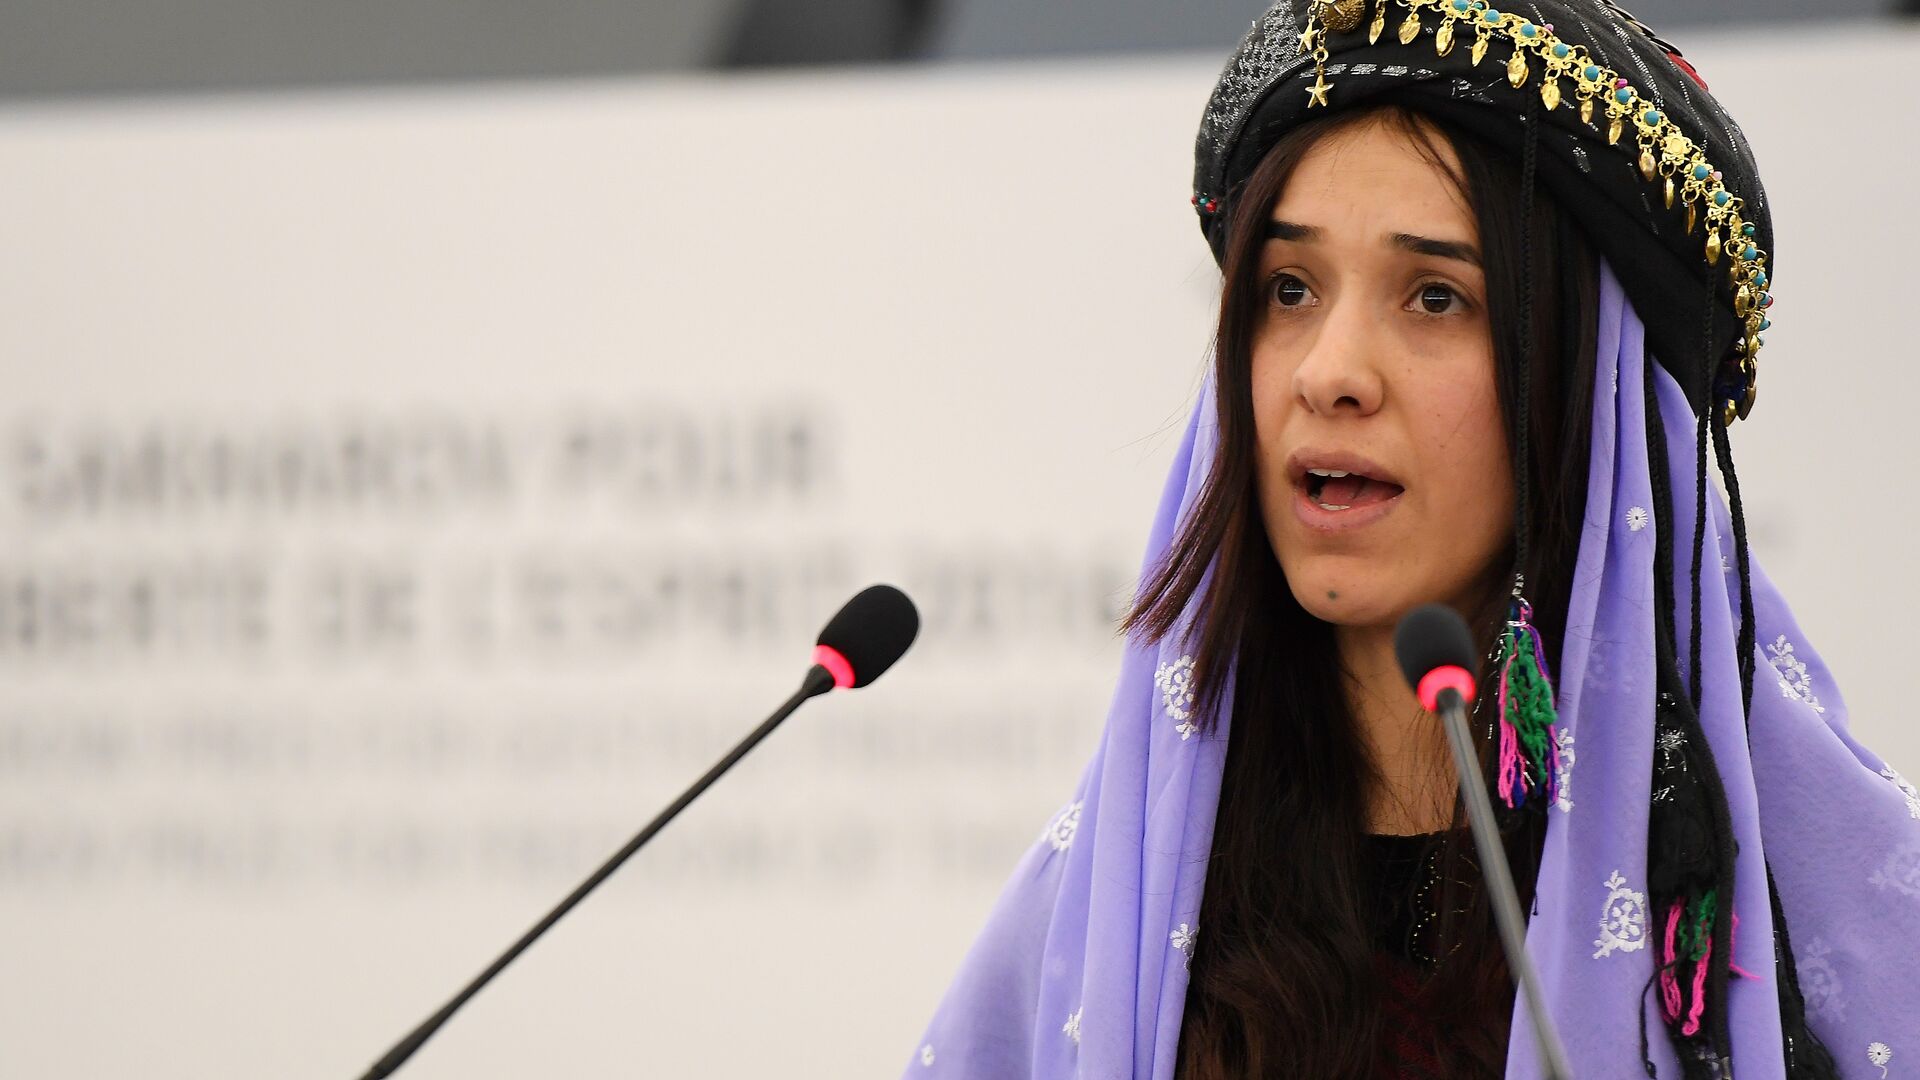 Nadia Murad , public advocates for the Yazidi community in Iraq and survivors of sexual enslavement by the Islamic State jihadists delivers a speech after being awarded co-laureate of the 2016 Sakharov human rights prize, on December 13, 2016 at the European parliament in Strasbourg - Sputnik Afrique, 1920, 19.11.2021